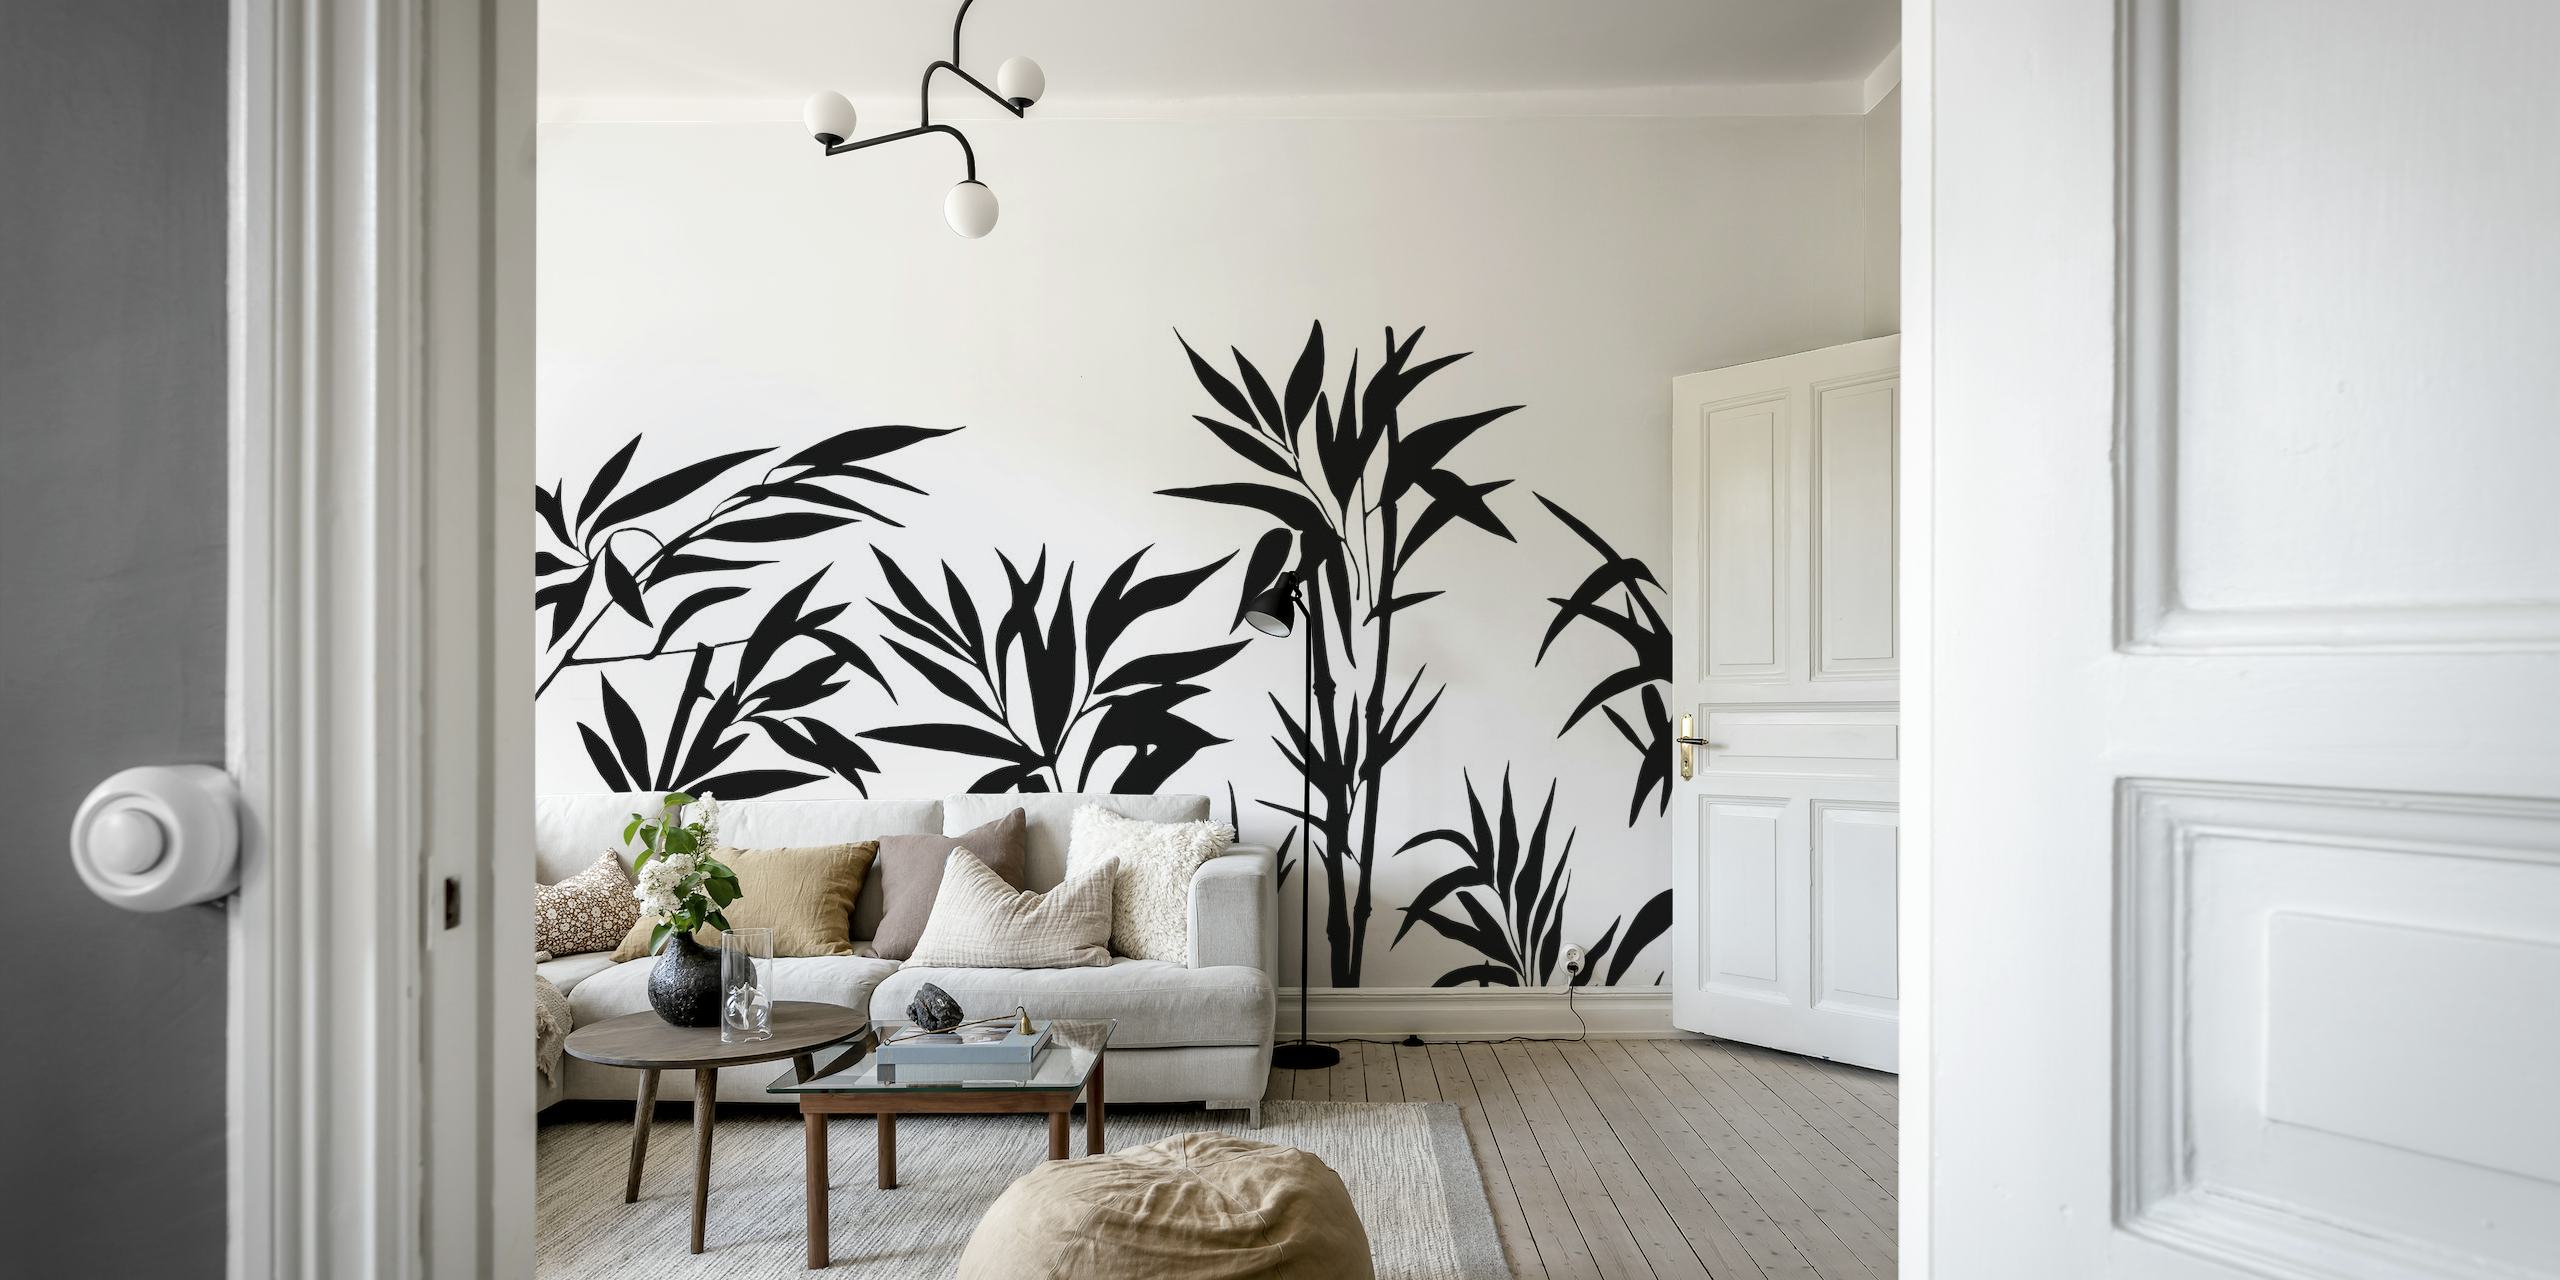 Zan Bamboo Tranquility Black And White behang